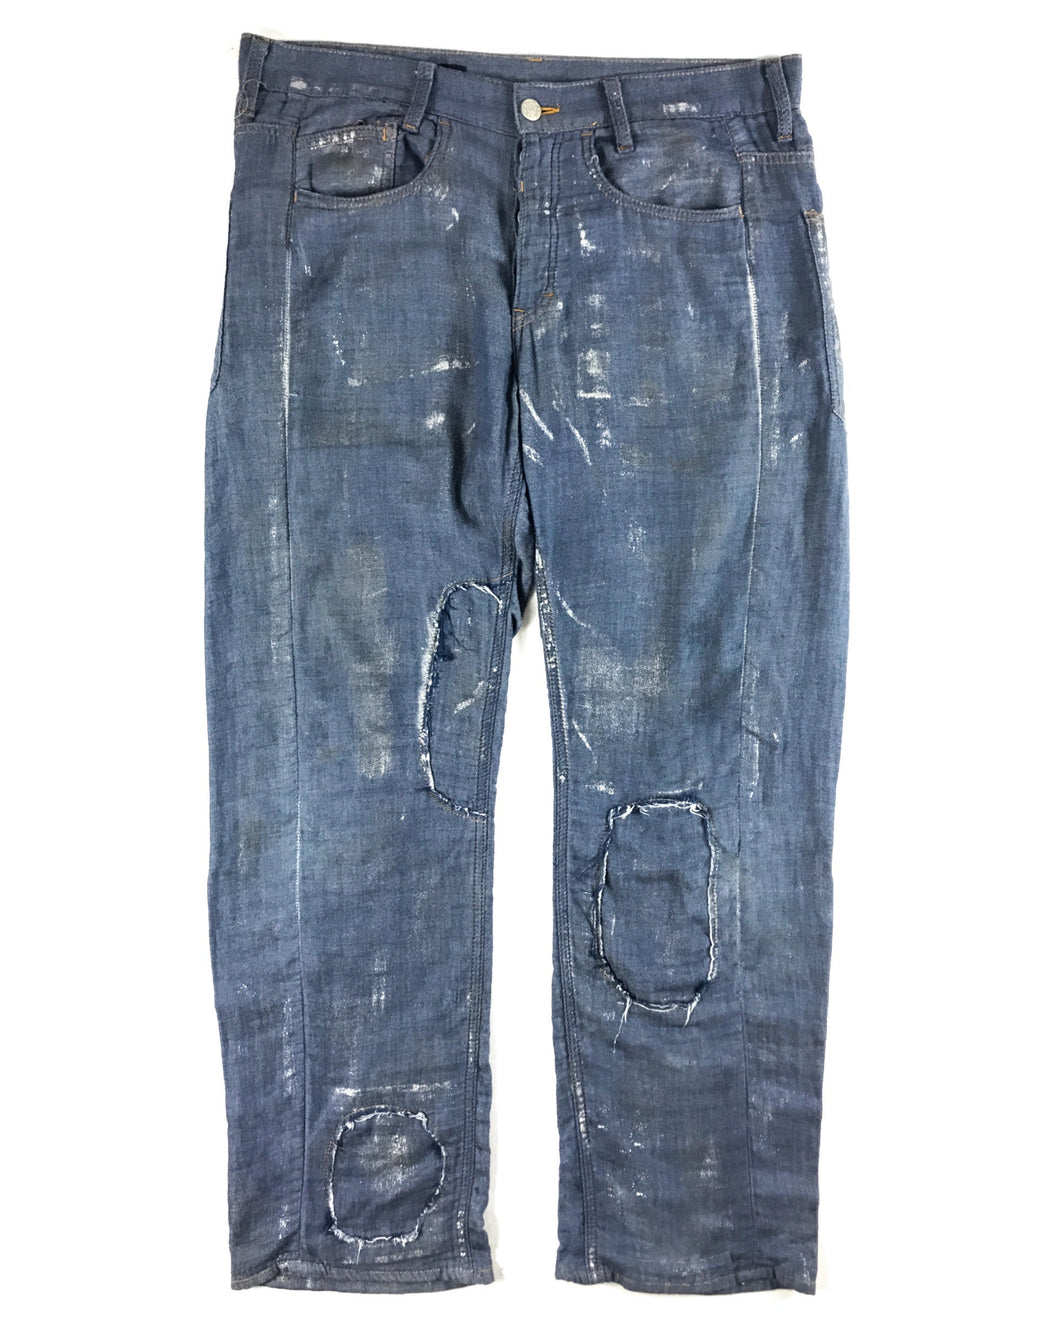 ZUCCA Distressed Cotton Pants (31.5”-33.5”)